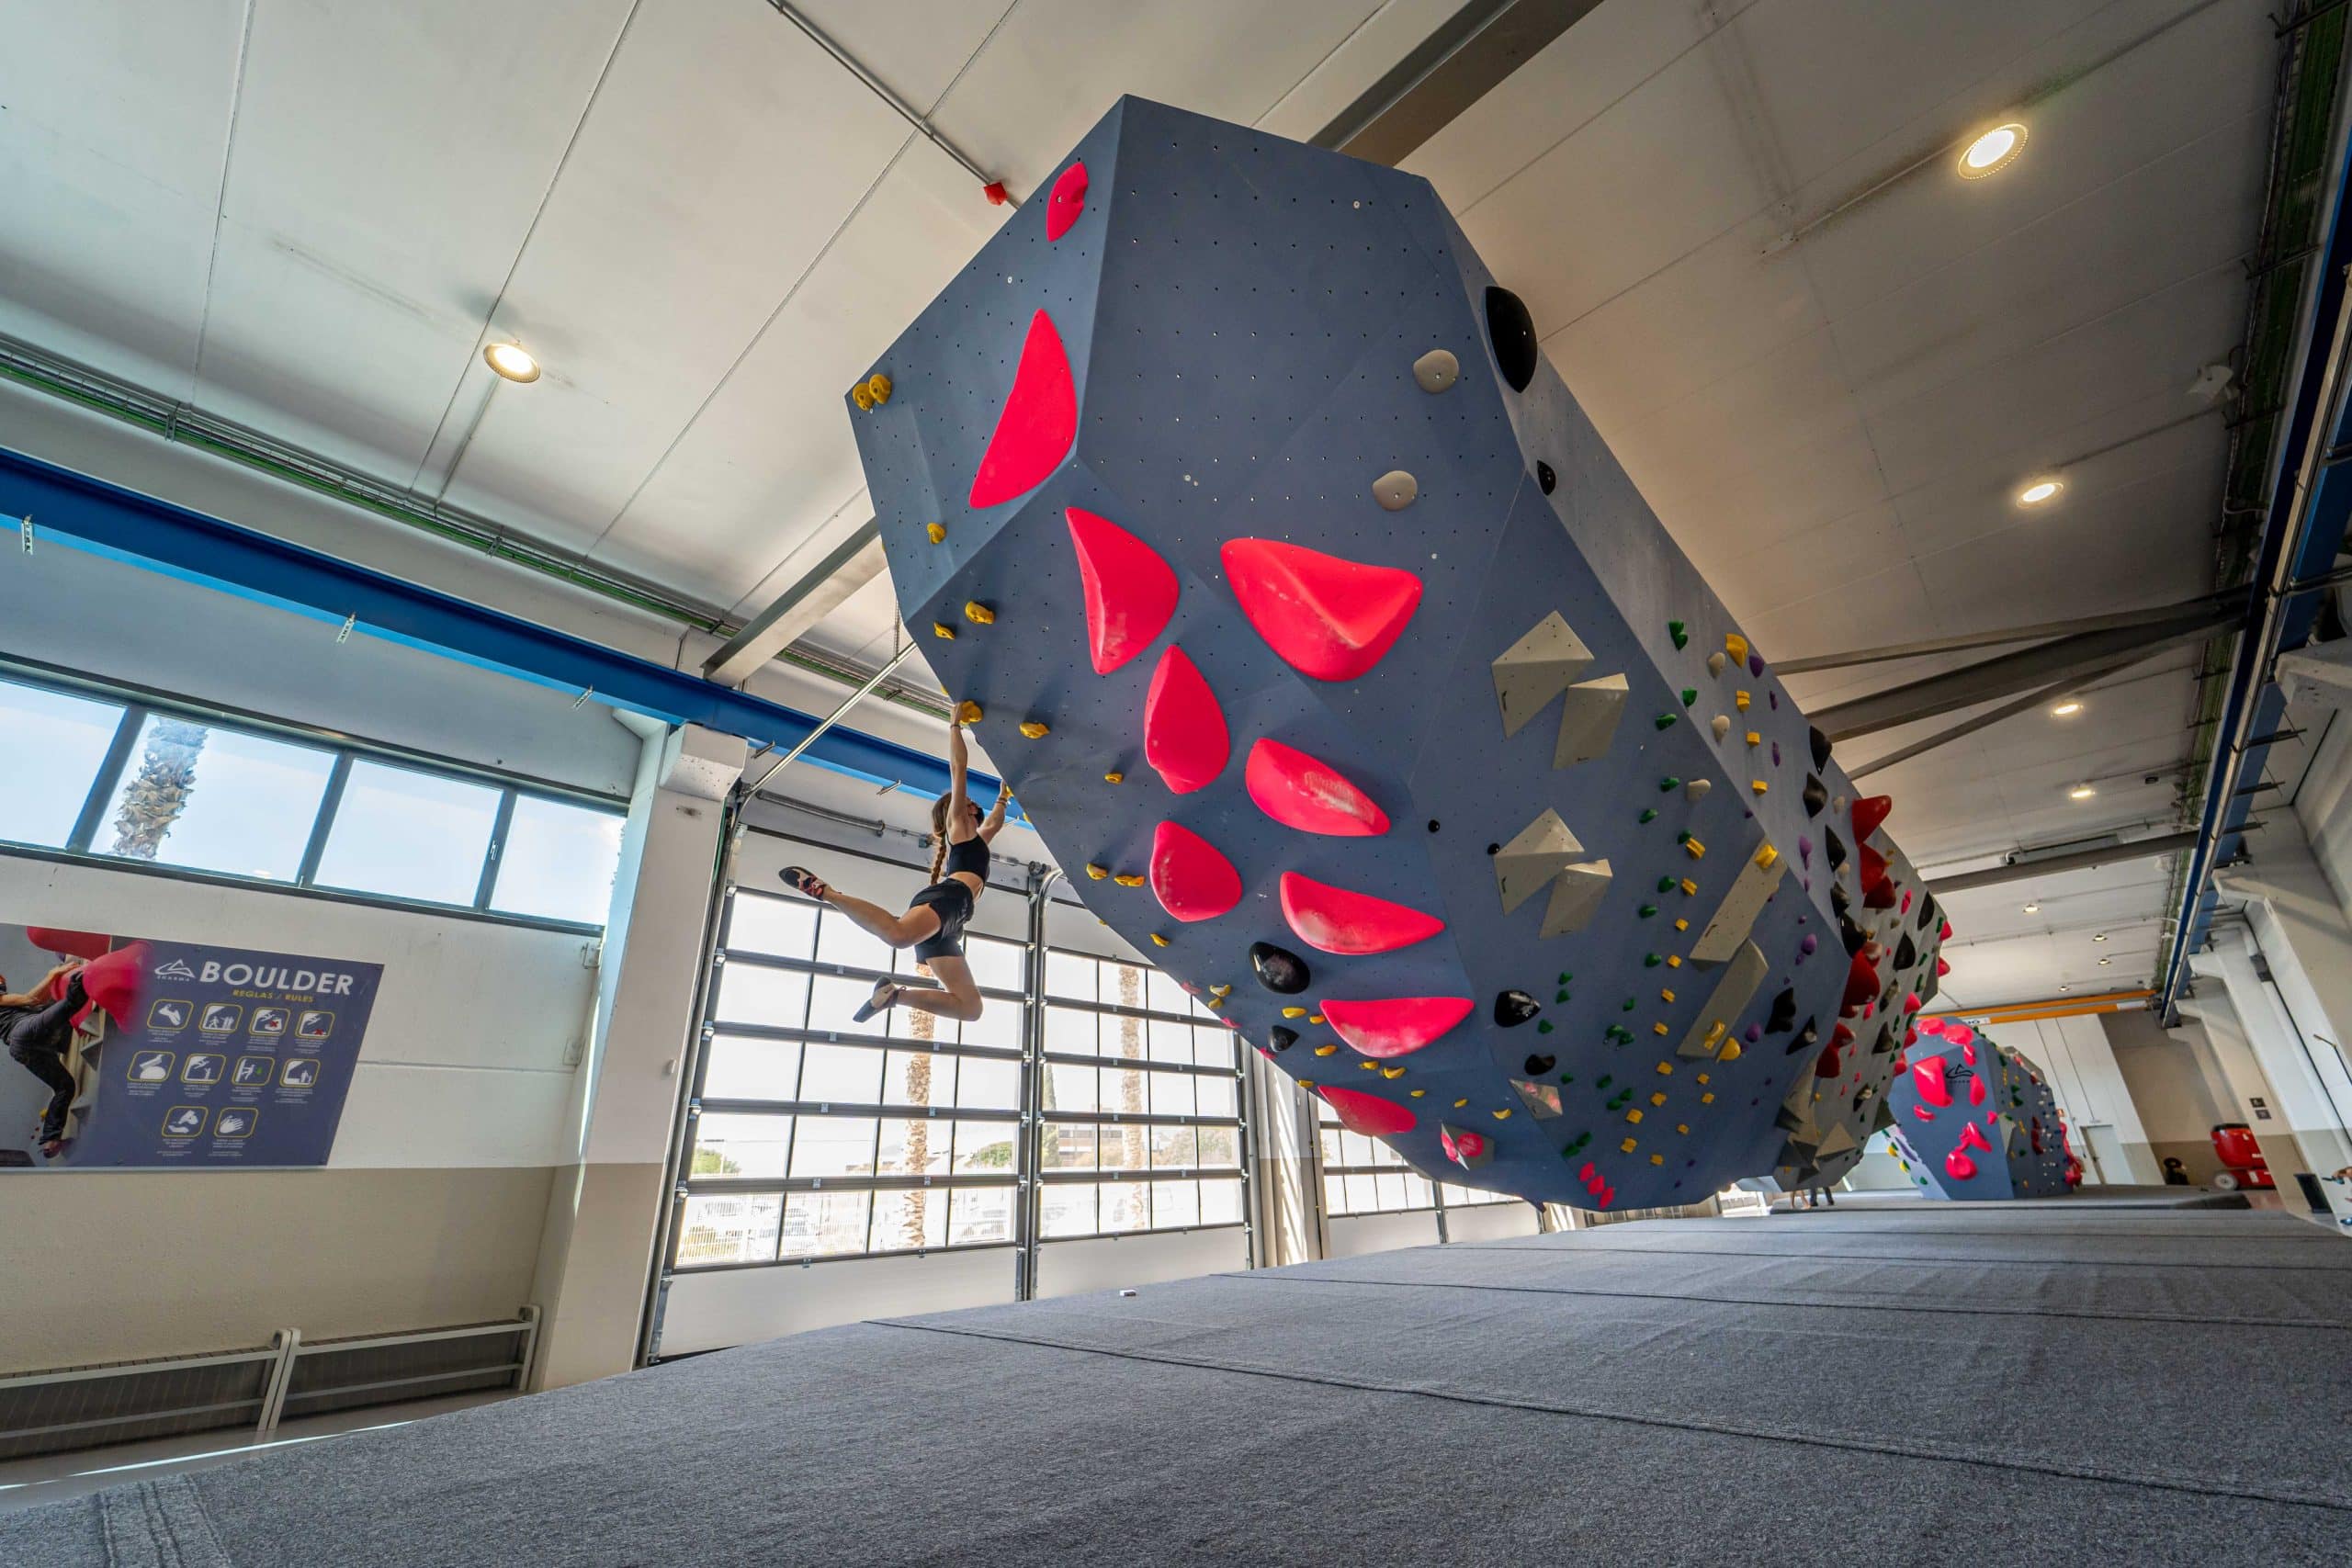 Pitfalls to Building Community in Commercial Climbing Gyms